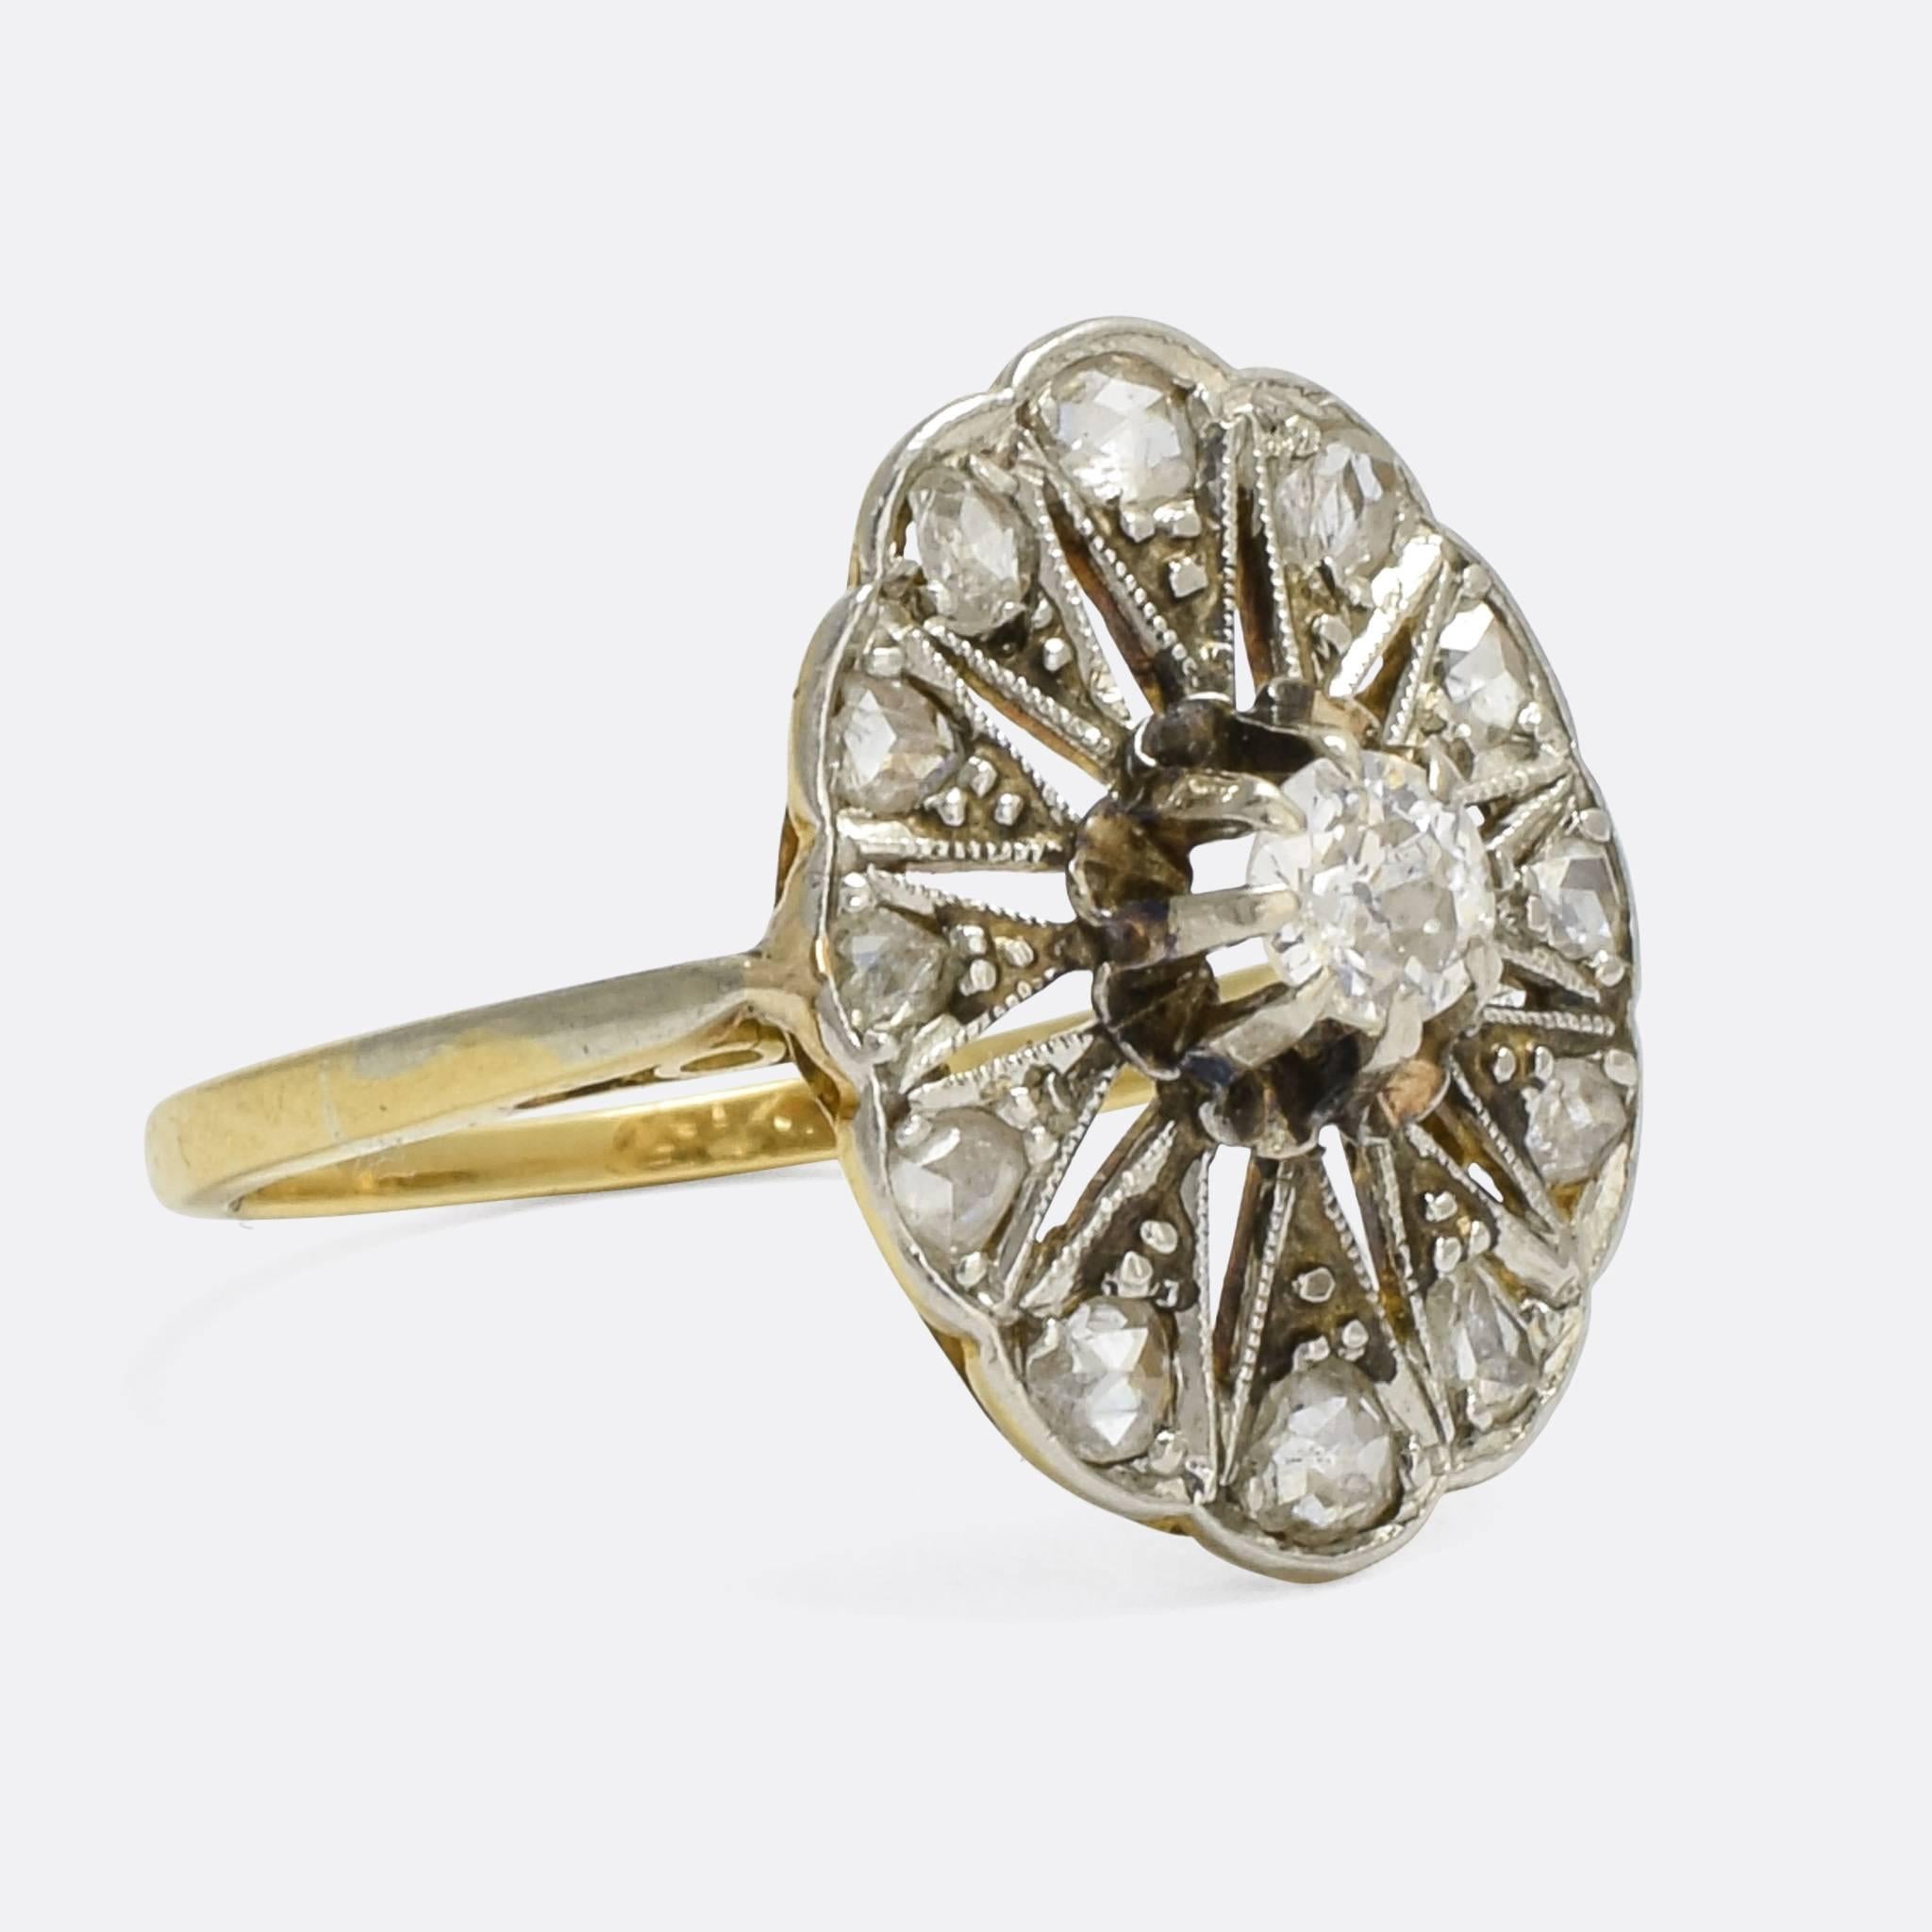 An unusual Edwardian diamond ring. The central old Euro stone is set in a scalloped claw mount, and surrounded by an oval cluster of rose cut diamonds, with an openworked star motif and finished in millegrain. It dates from c.1910, modelled in